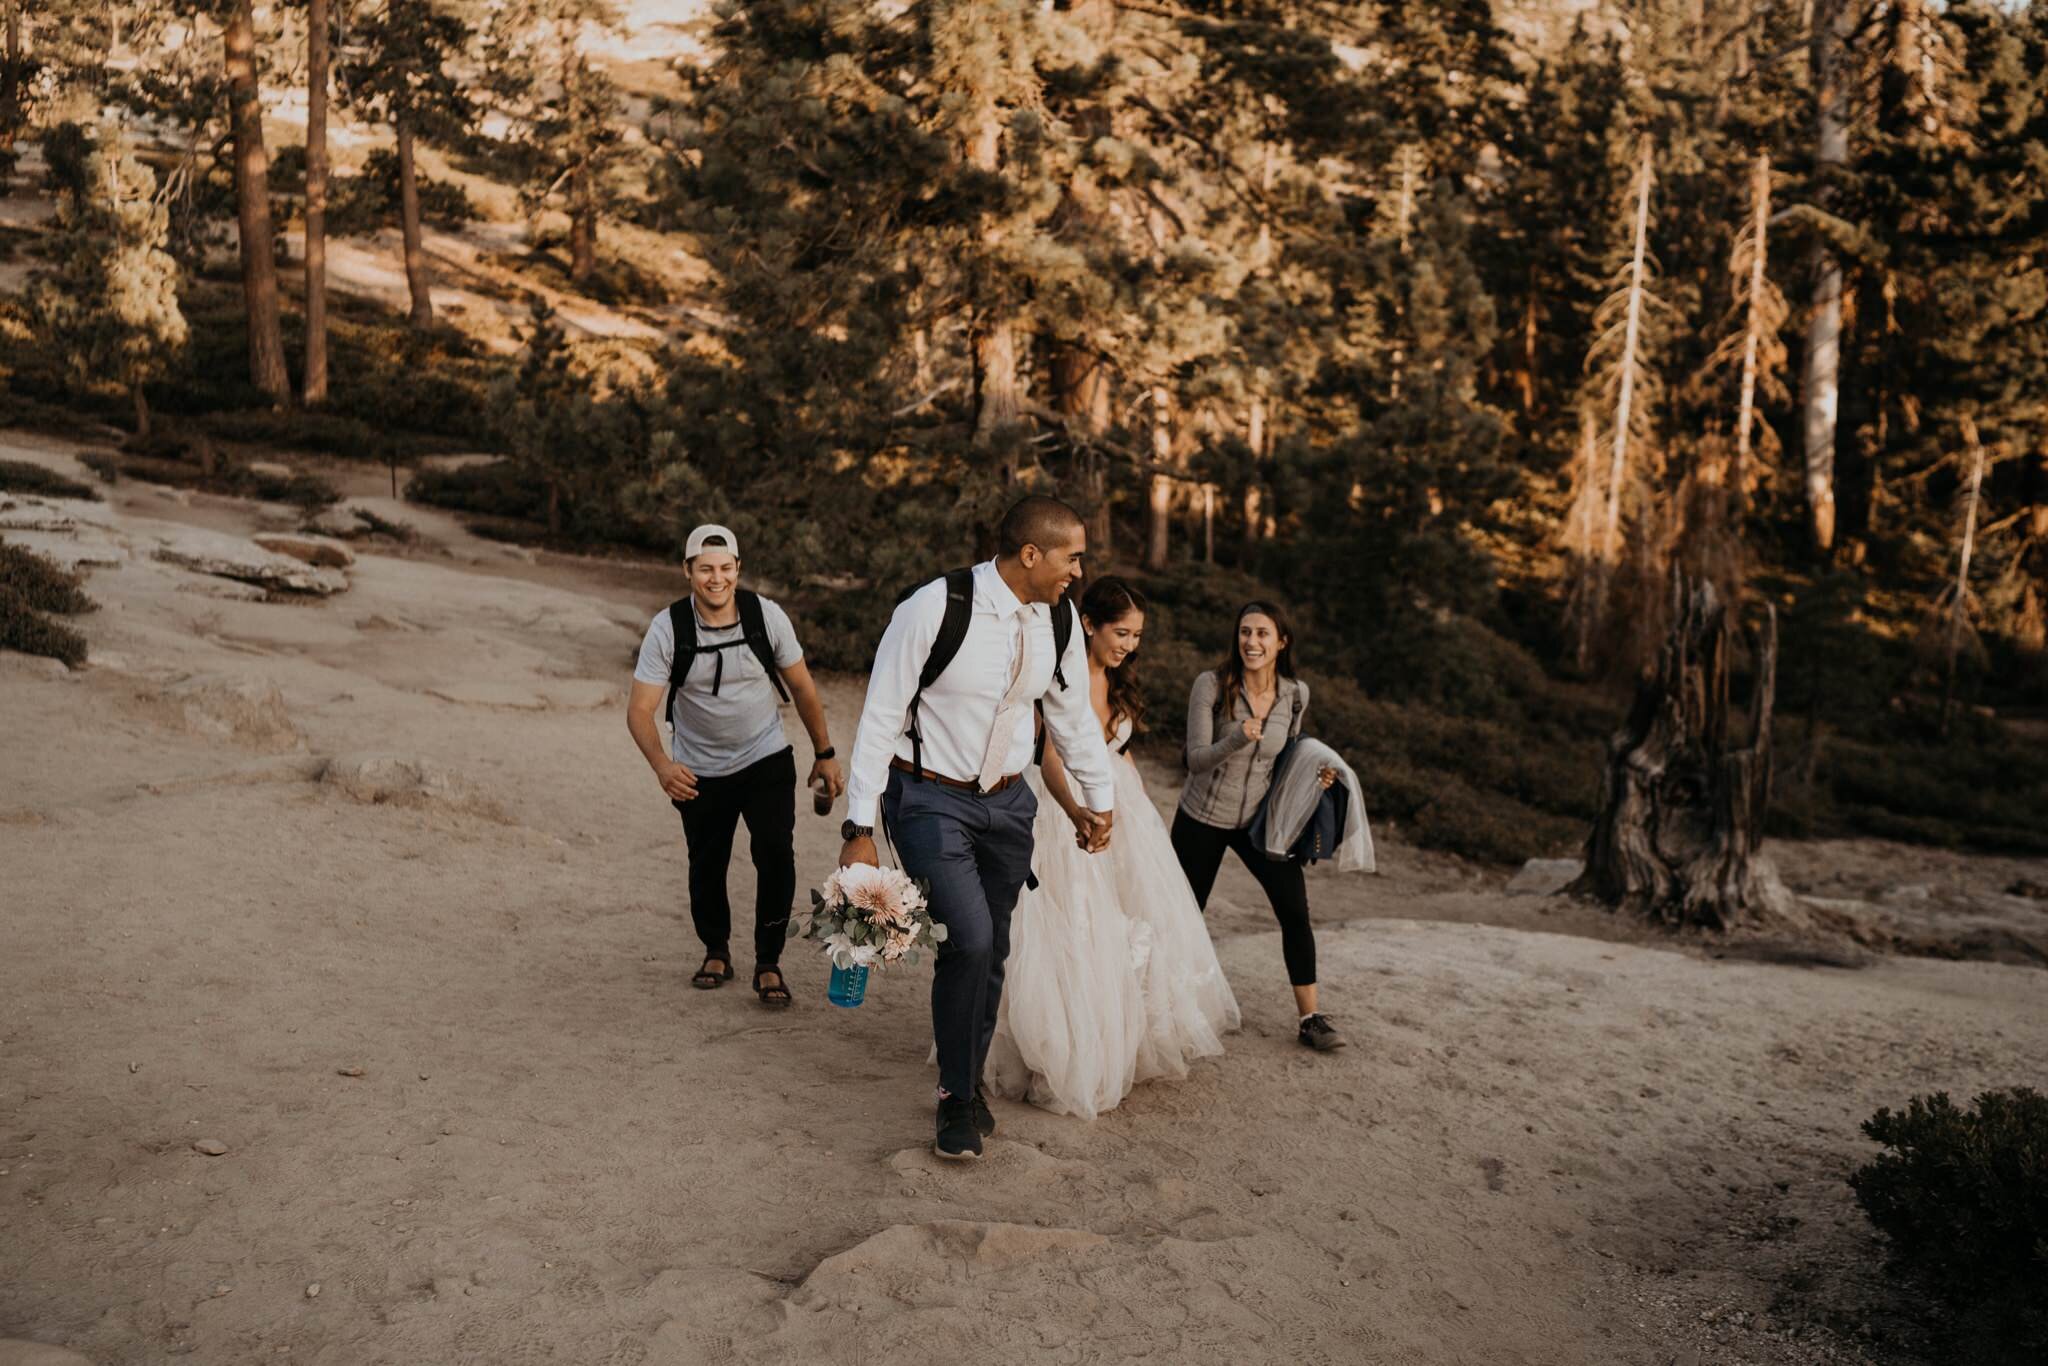 Married couple hiking with "Just Married" sign to Taft Point for sunset photos on their Elopement Day at Yosemite National Park